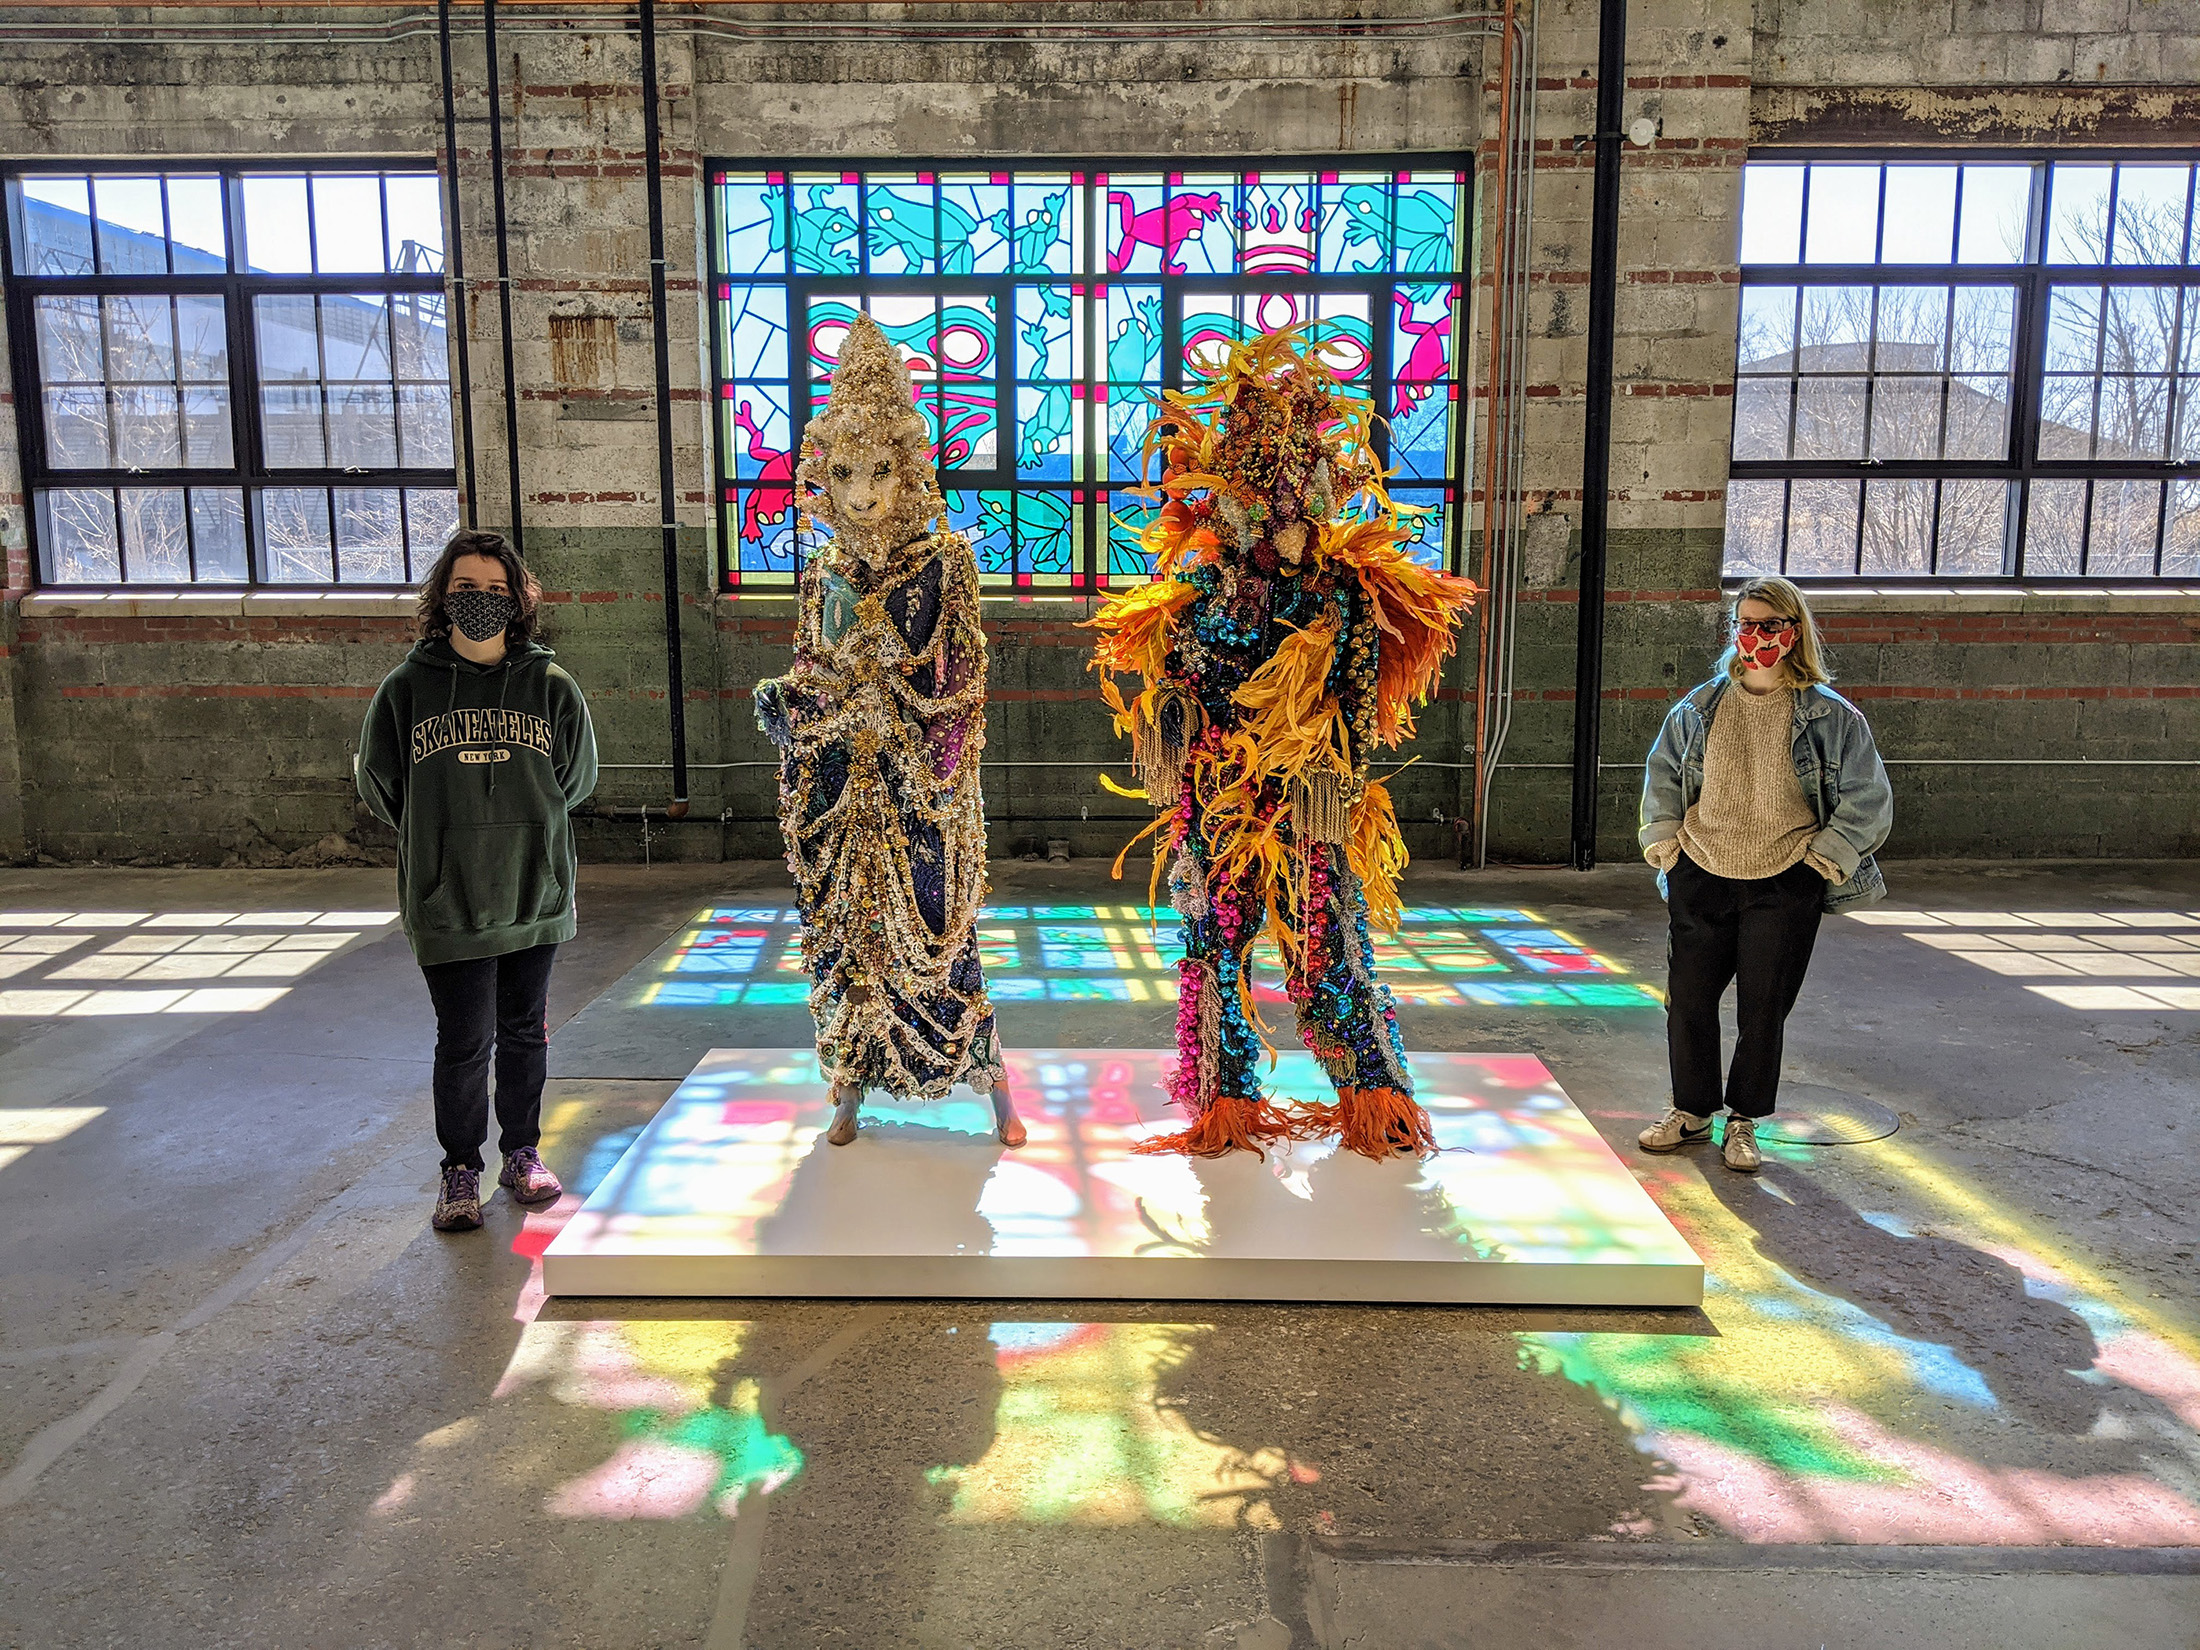 Two students stand beside two large sculptures inside a warehouse-looking space.